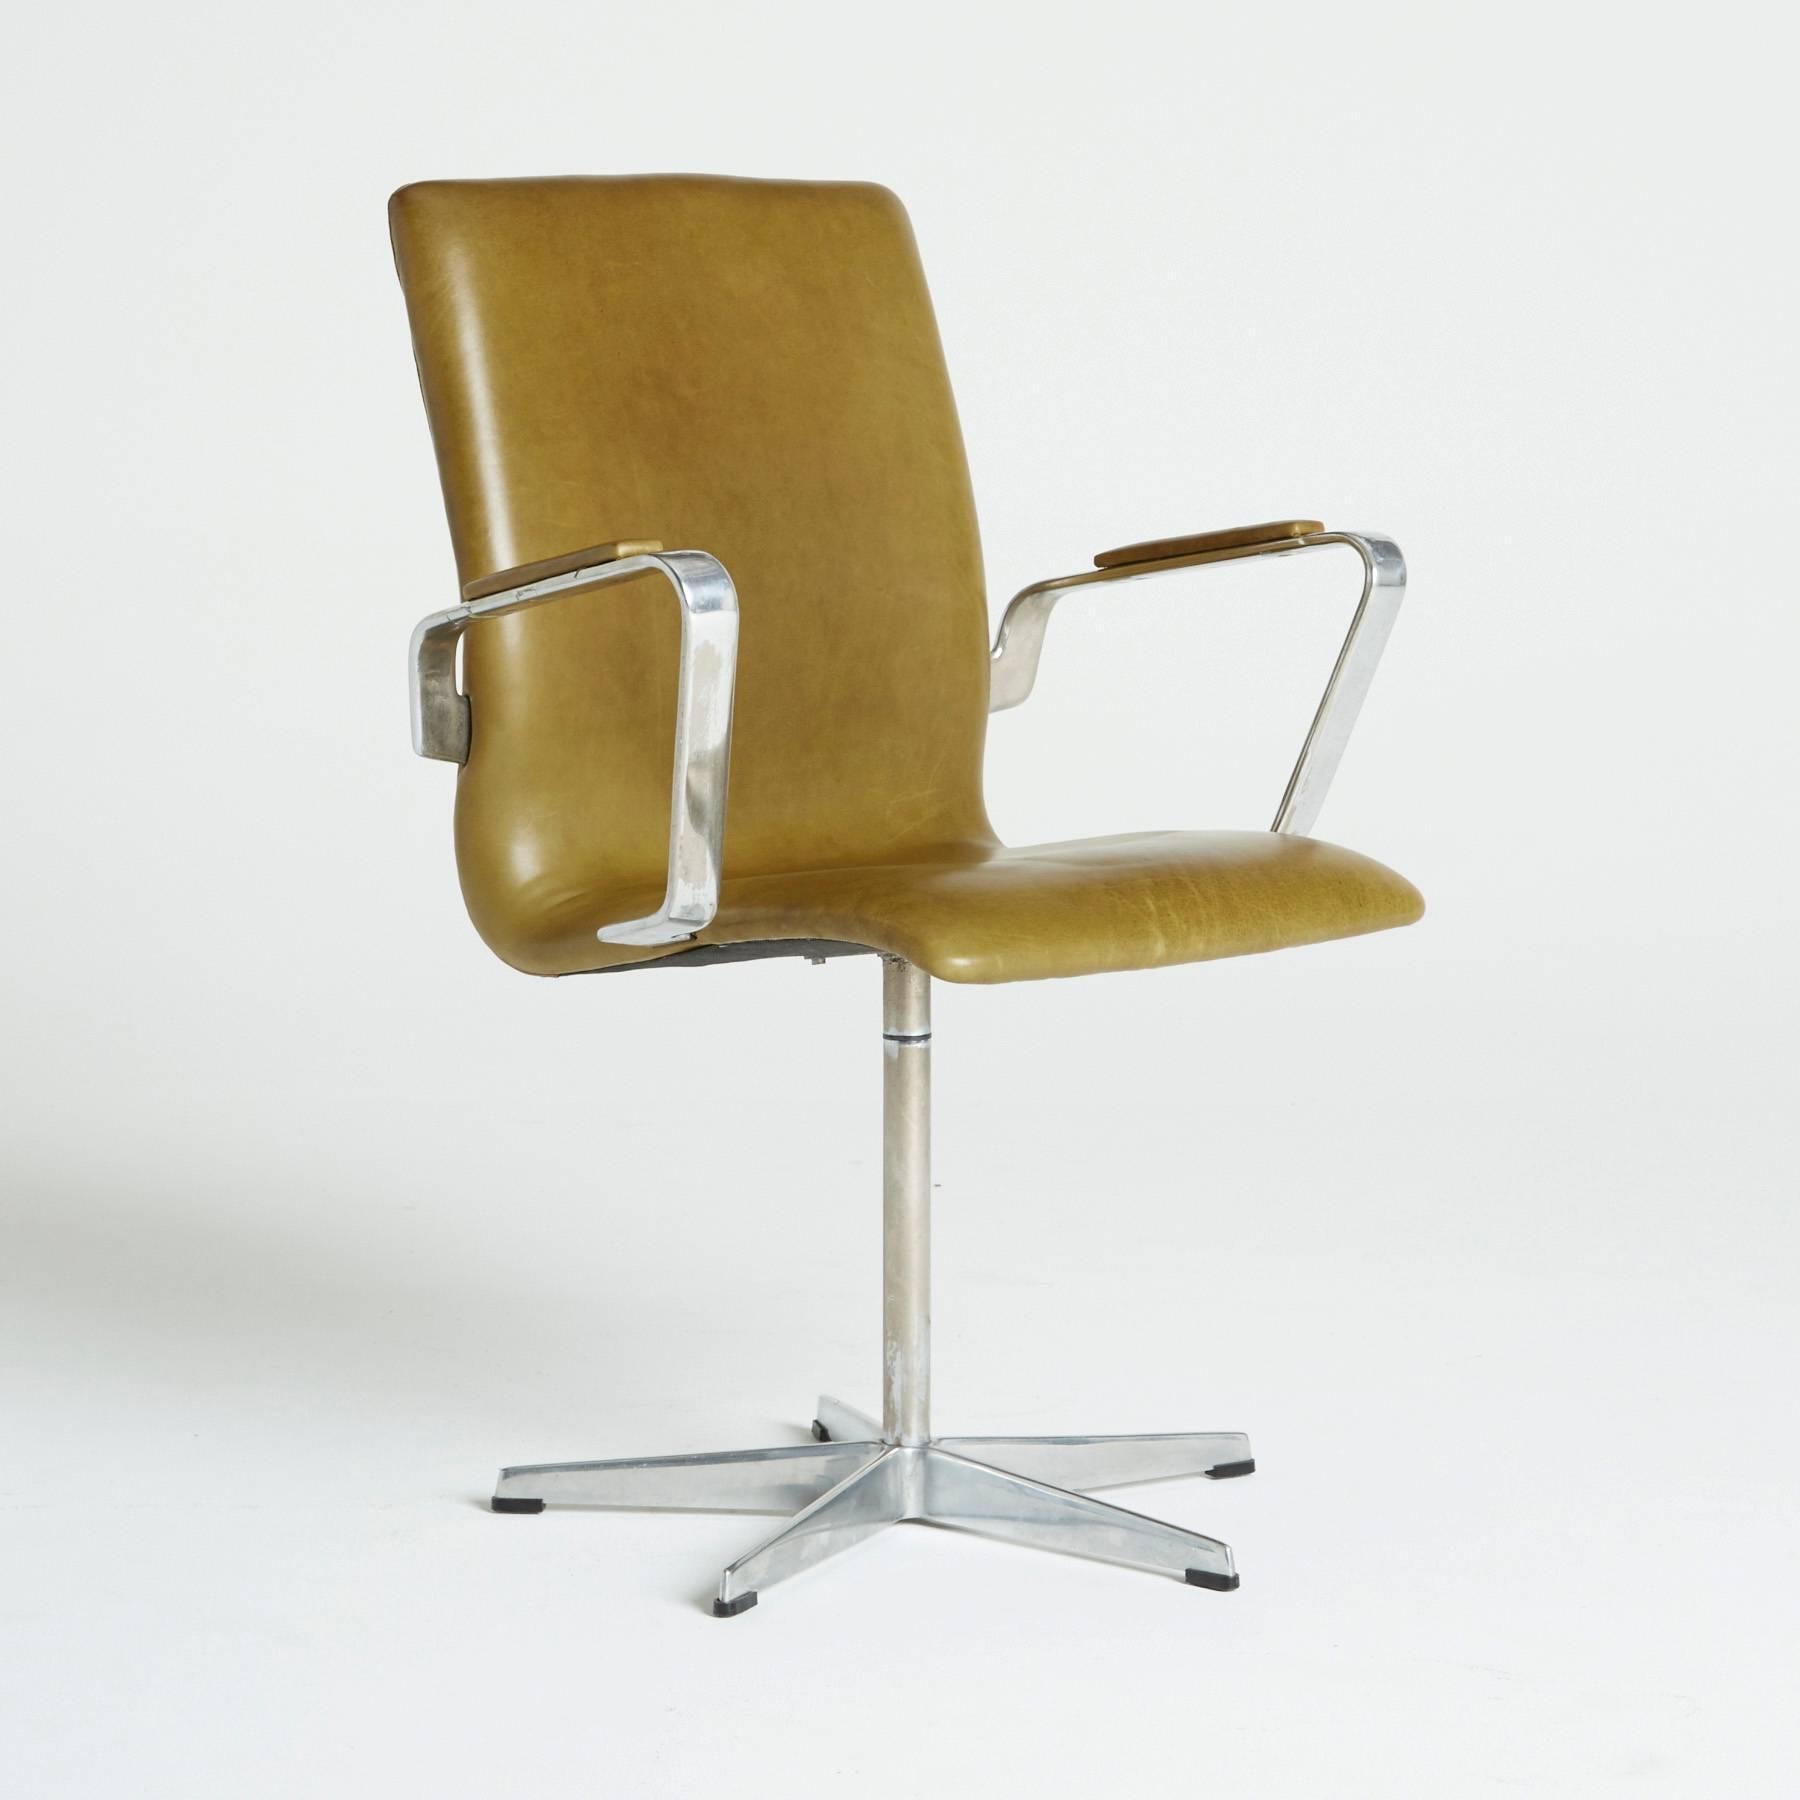 Leather Oxford Swivel Chairs by Arne Jacobsen for Fritz Hansen, 1973, Signed